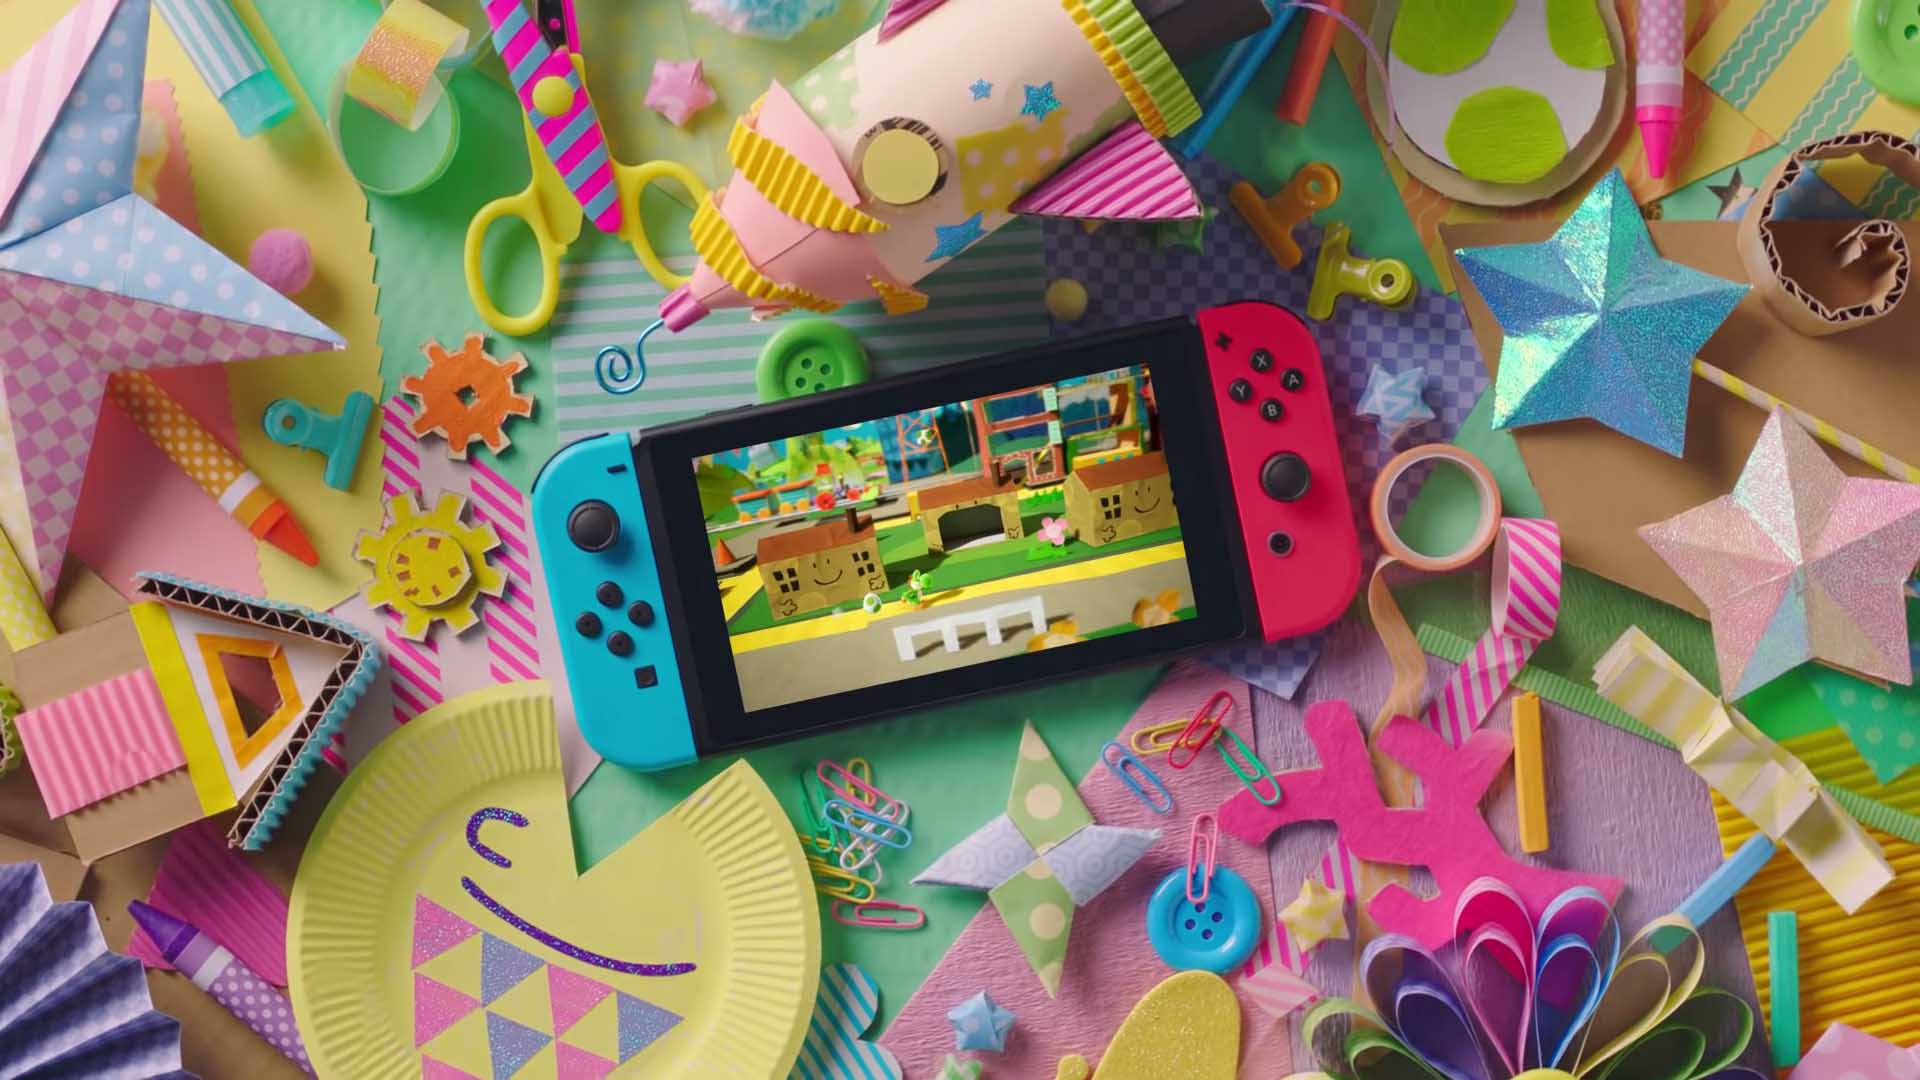 Watch three Nintendo regions promote Yoshi's Crafted World a little differently ...